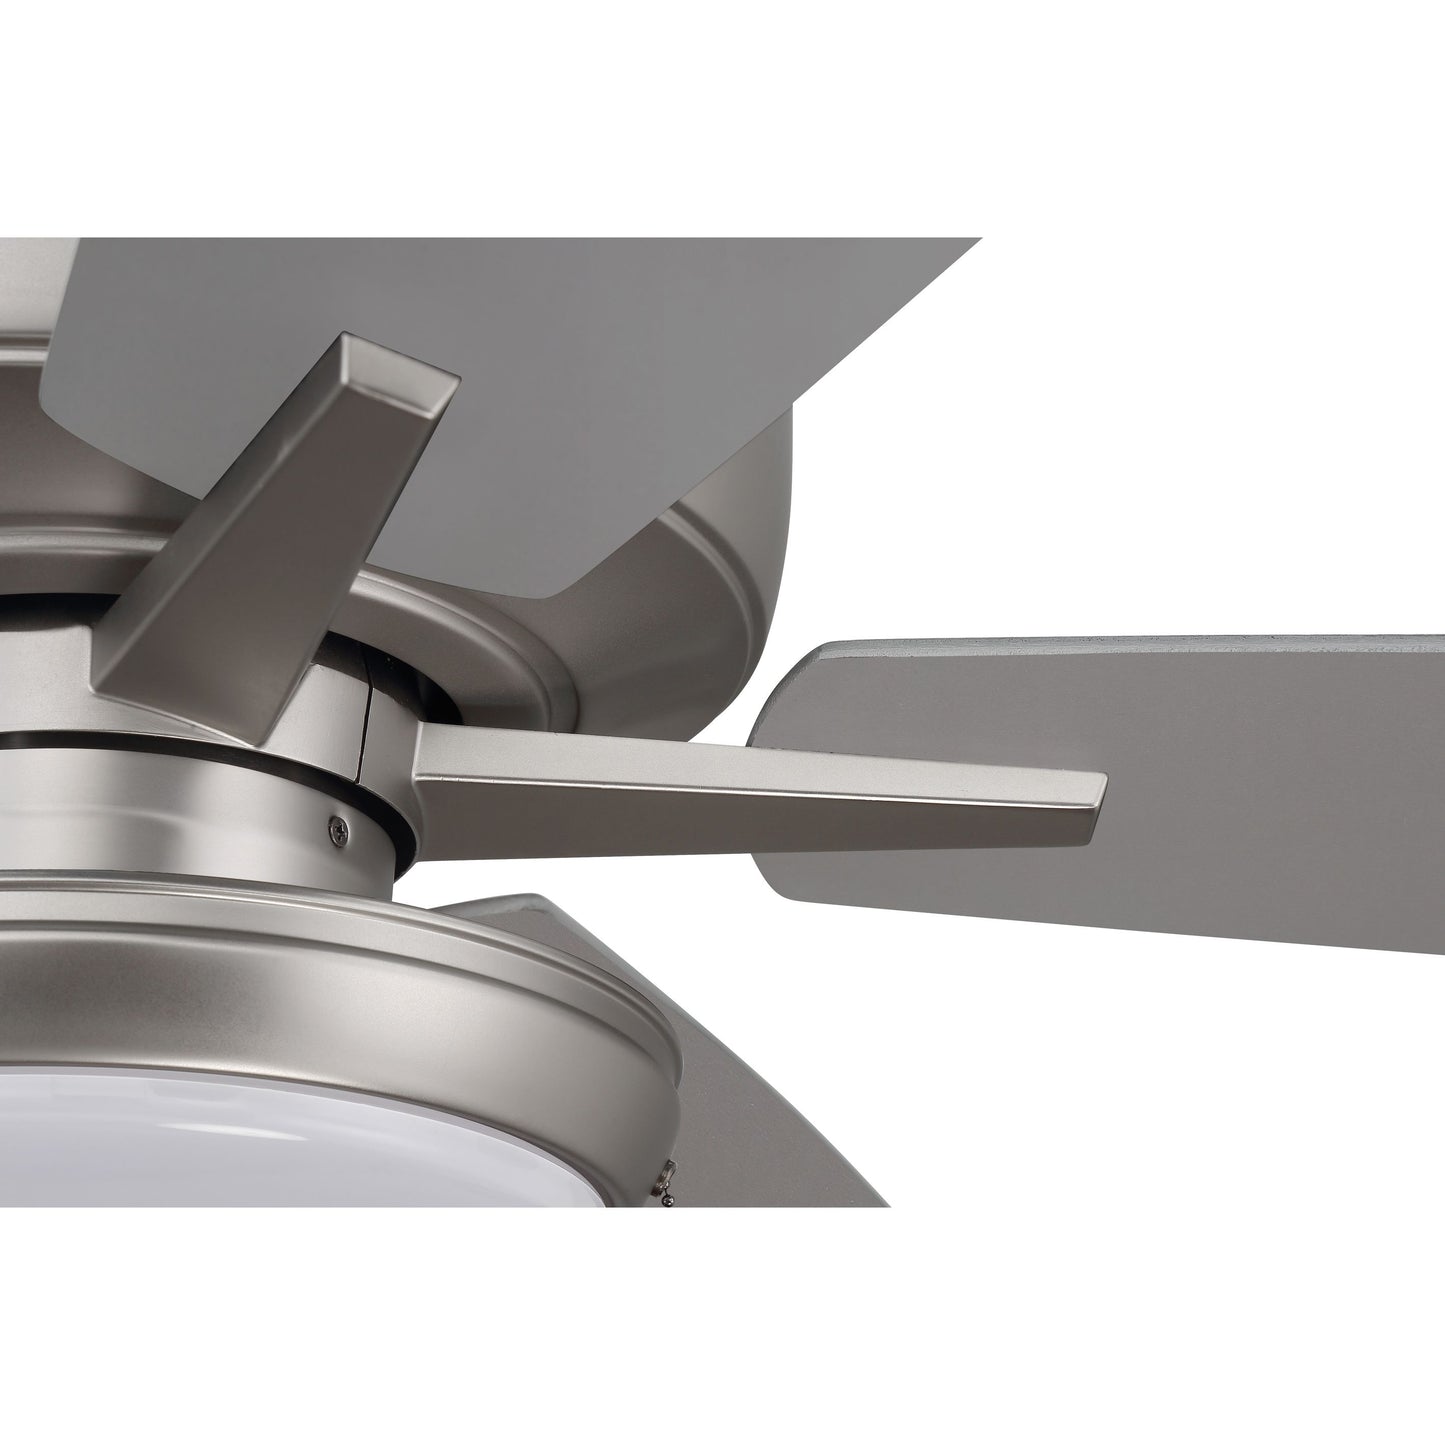 S119BN5-60BNGW - Super Pro 119 60" 5 Blade Ceiling Fan with Light Kit - Pull Chain - Brushed Satin N